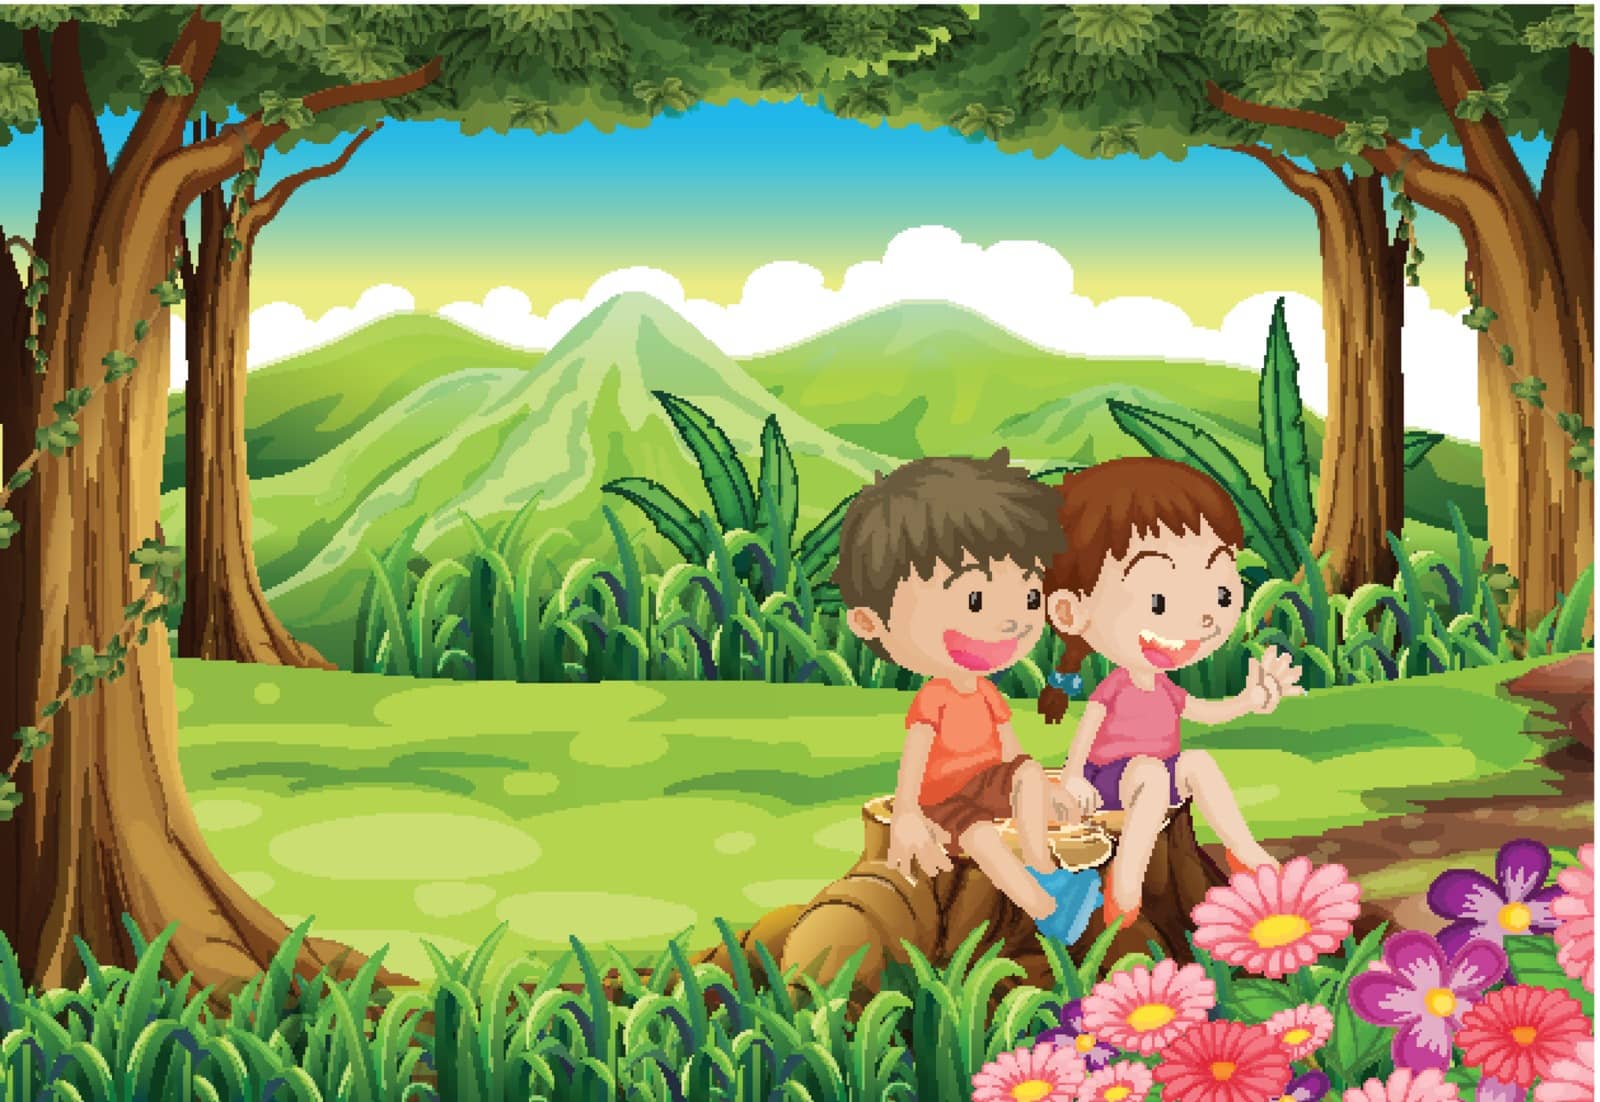 Illustration of a stump with two adorable kids